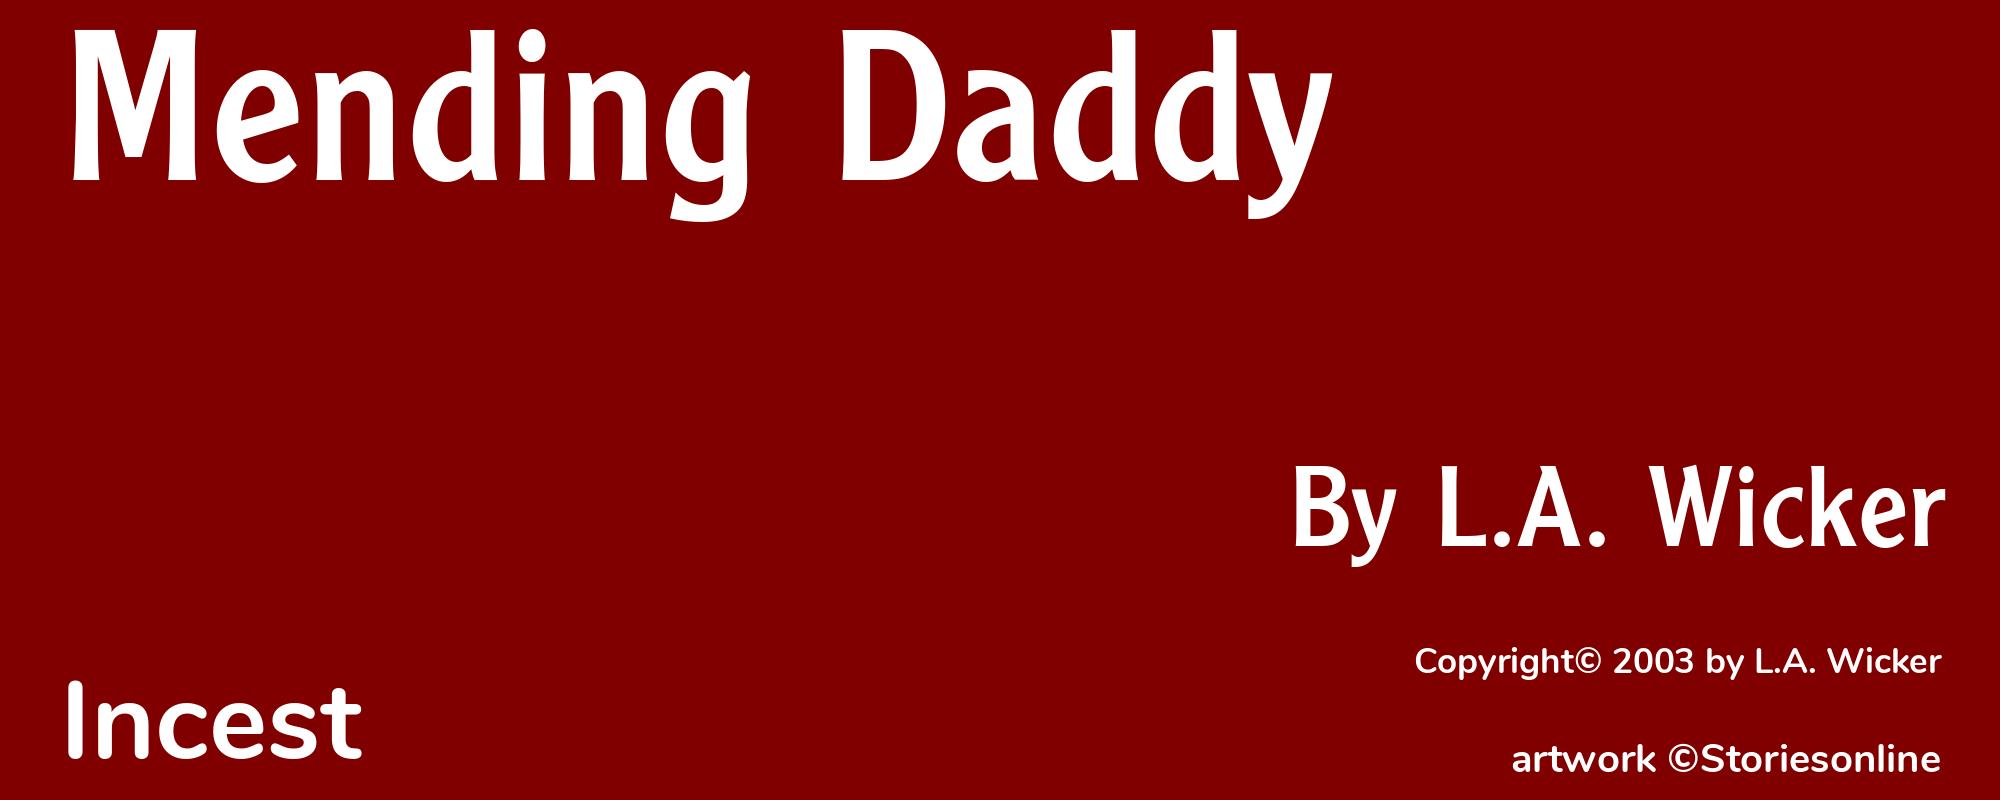 Mending Daddy - Cover